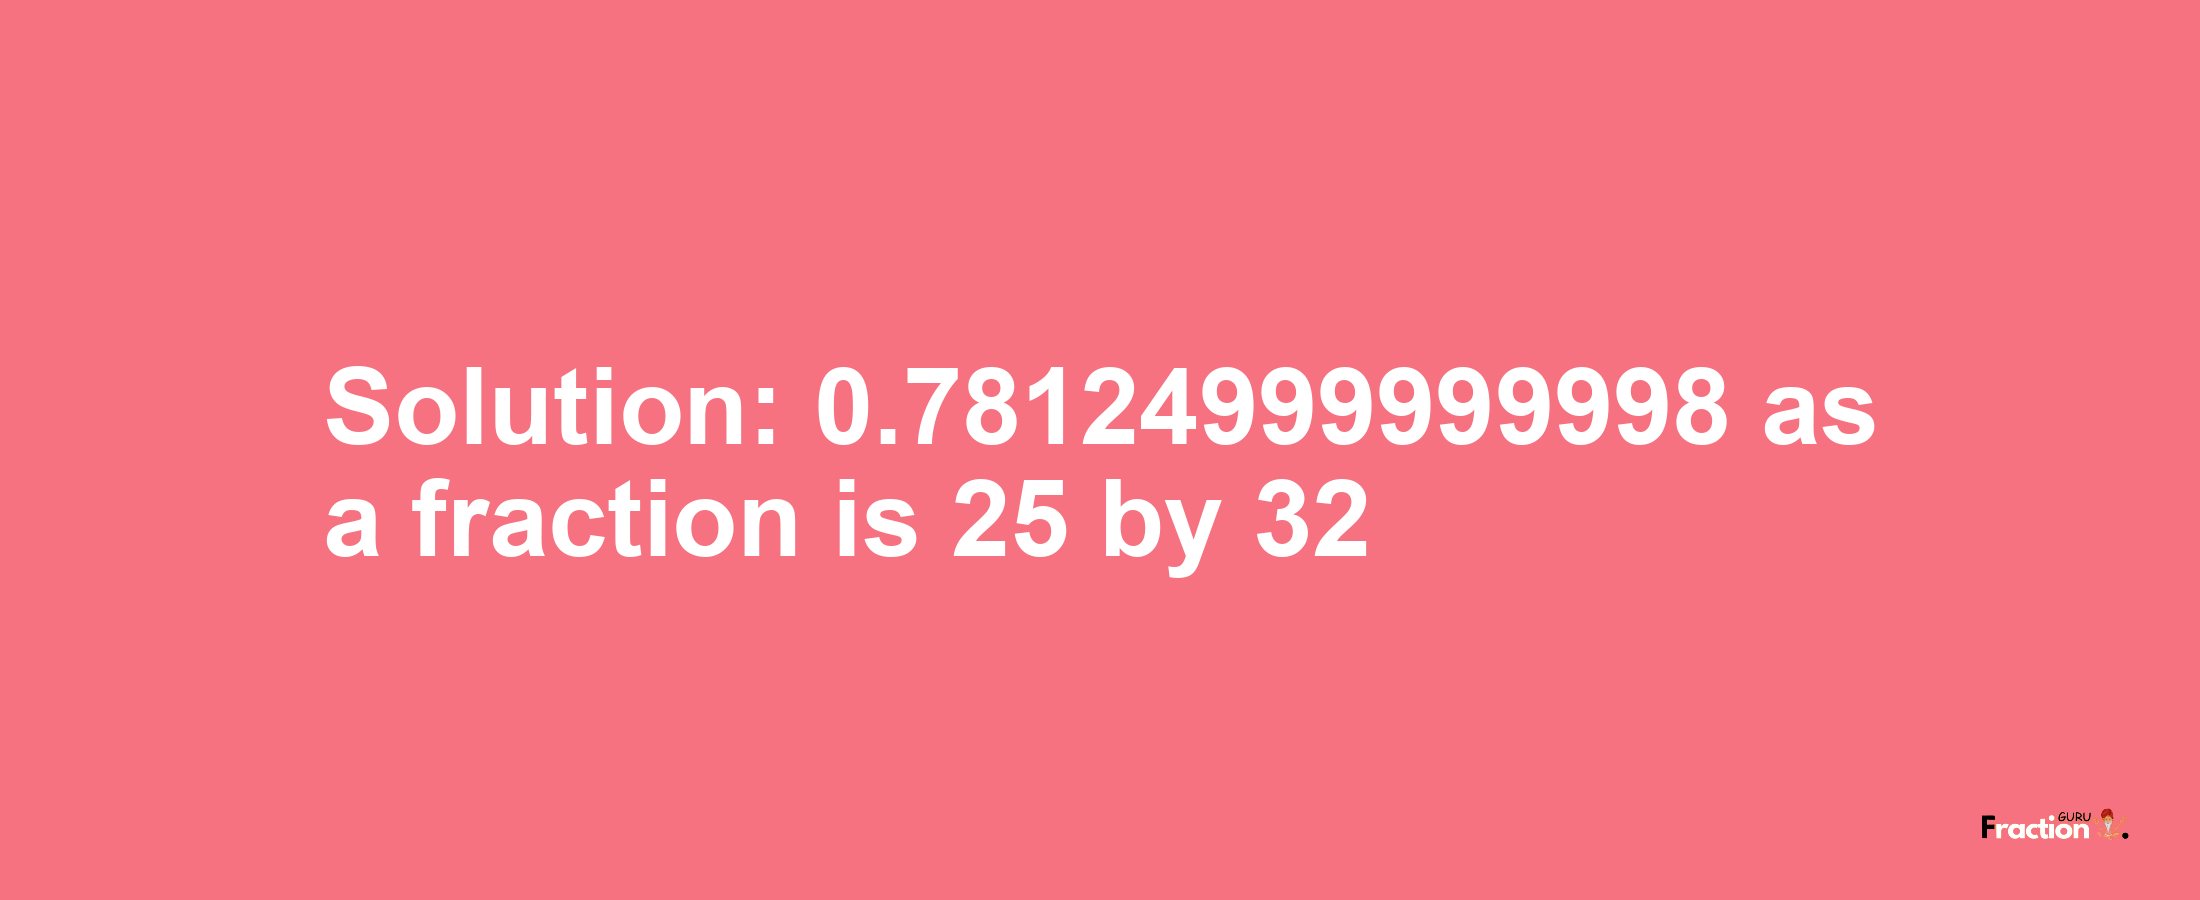 Solution:0.78124999999998 as a fraction is 25/32